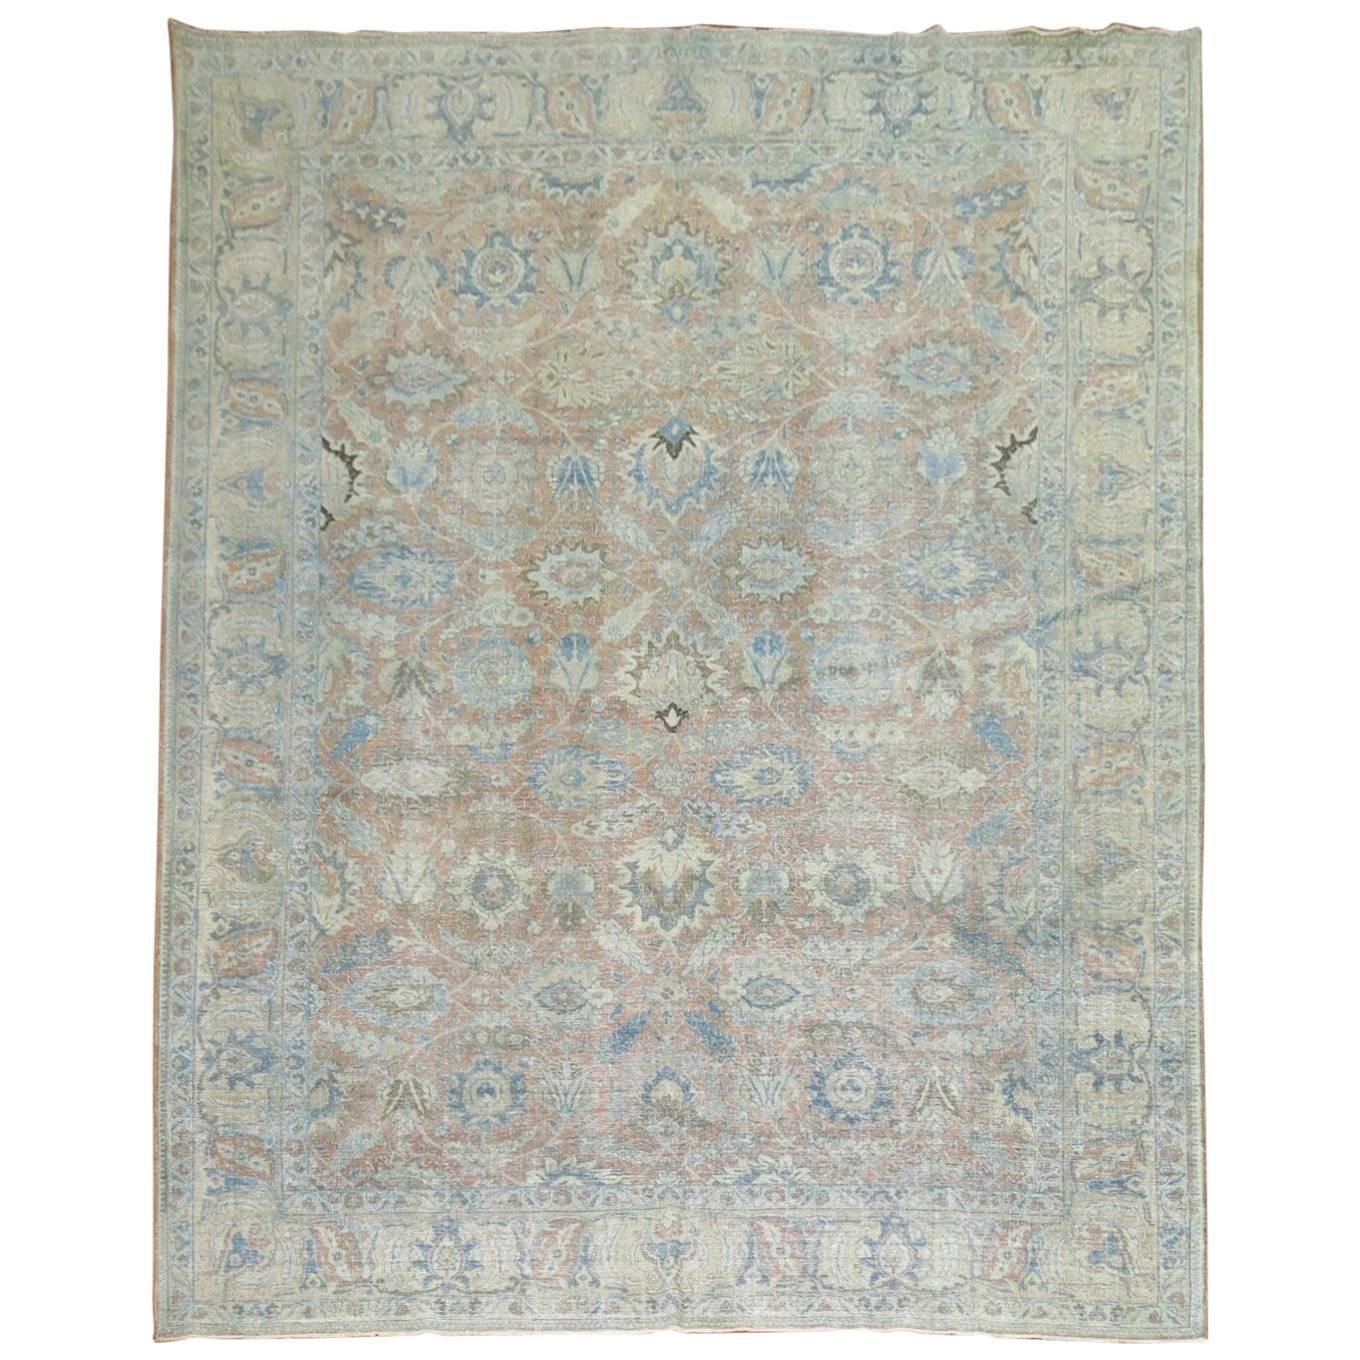 Soft Blue and Terracotta Antique Persian Tabriz Rug , Early 20th century